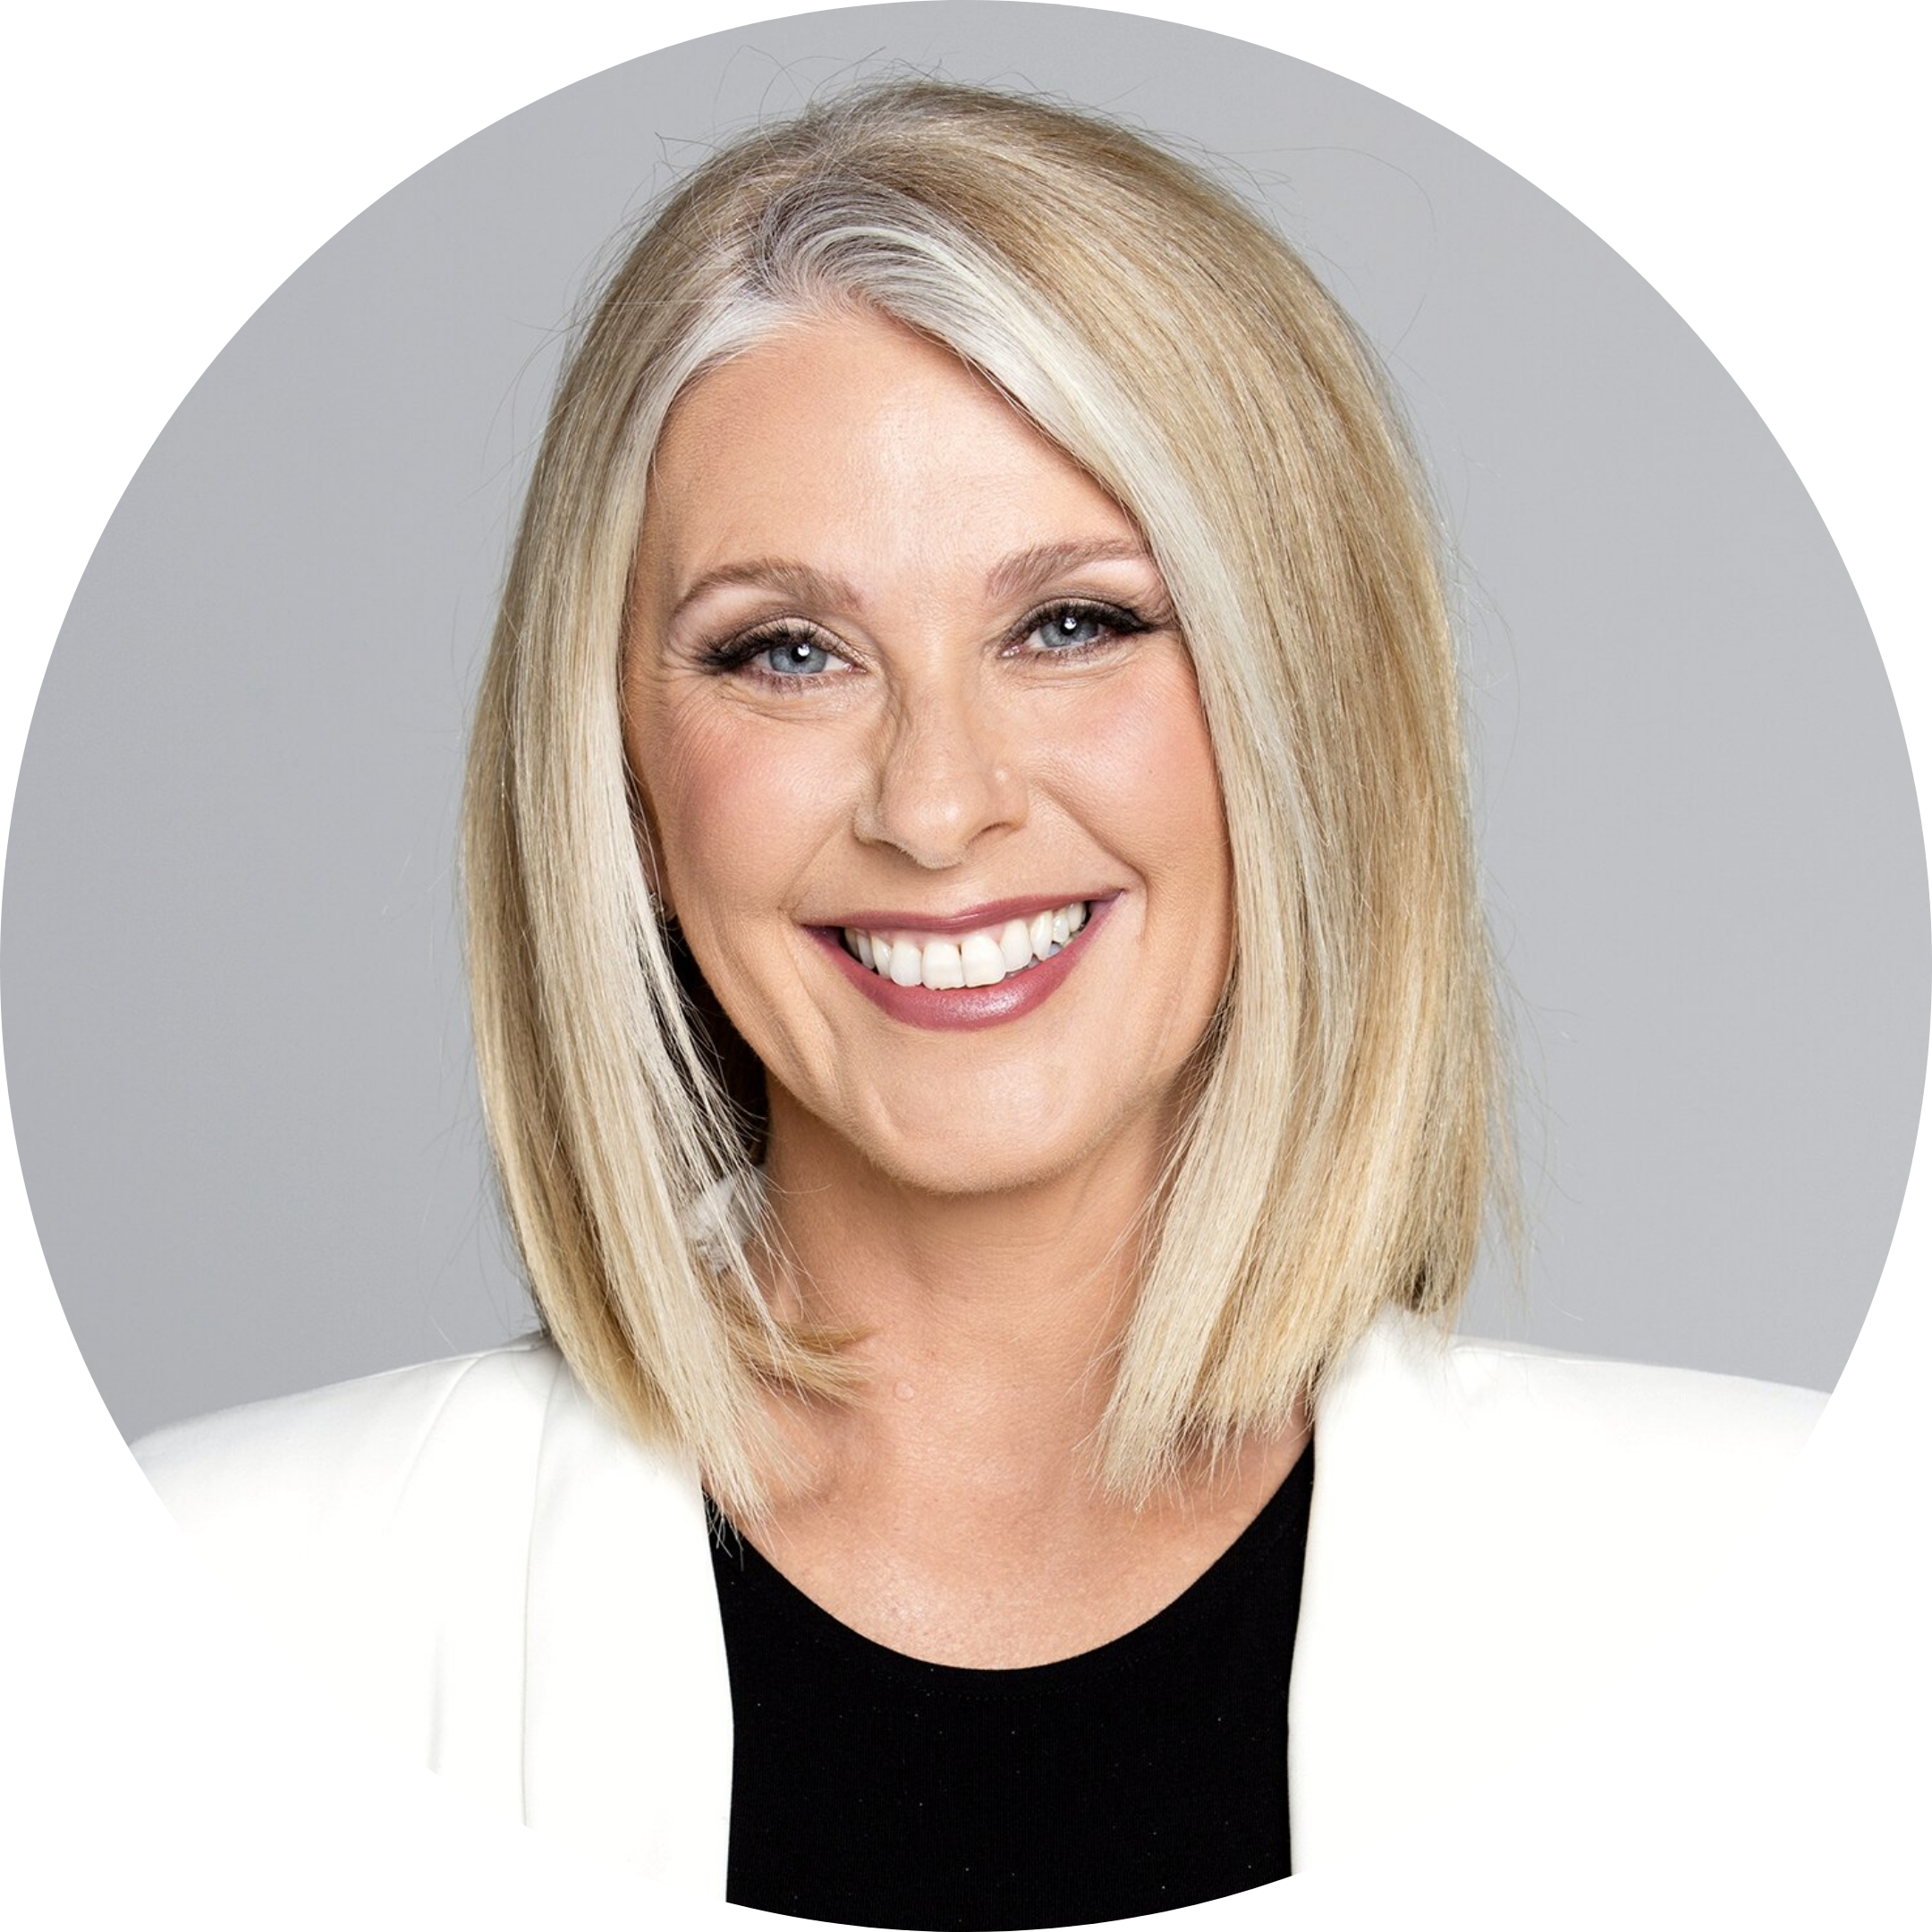 Tracey Spicer AM